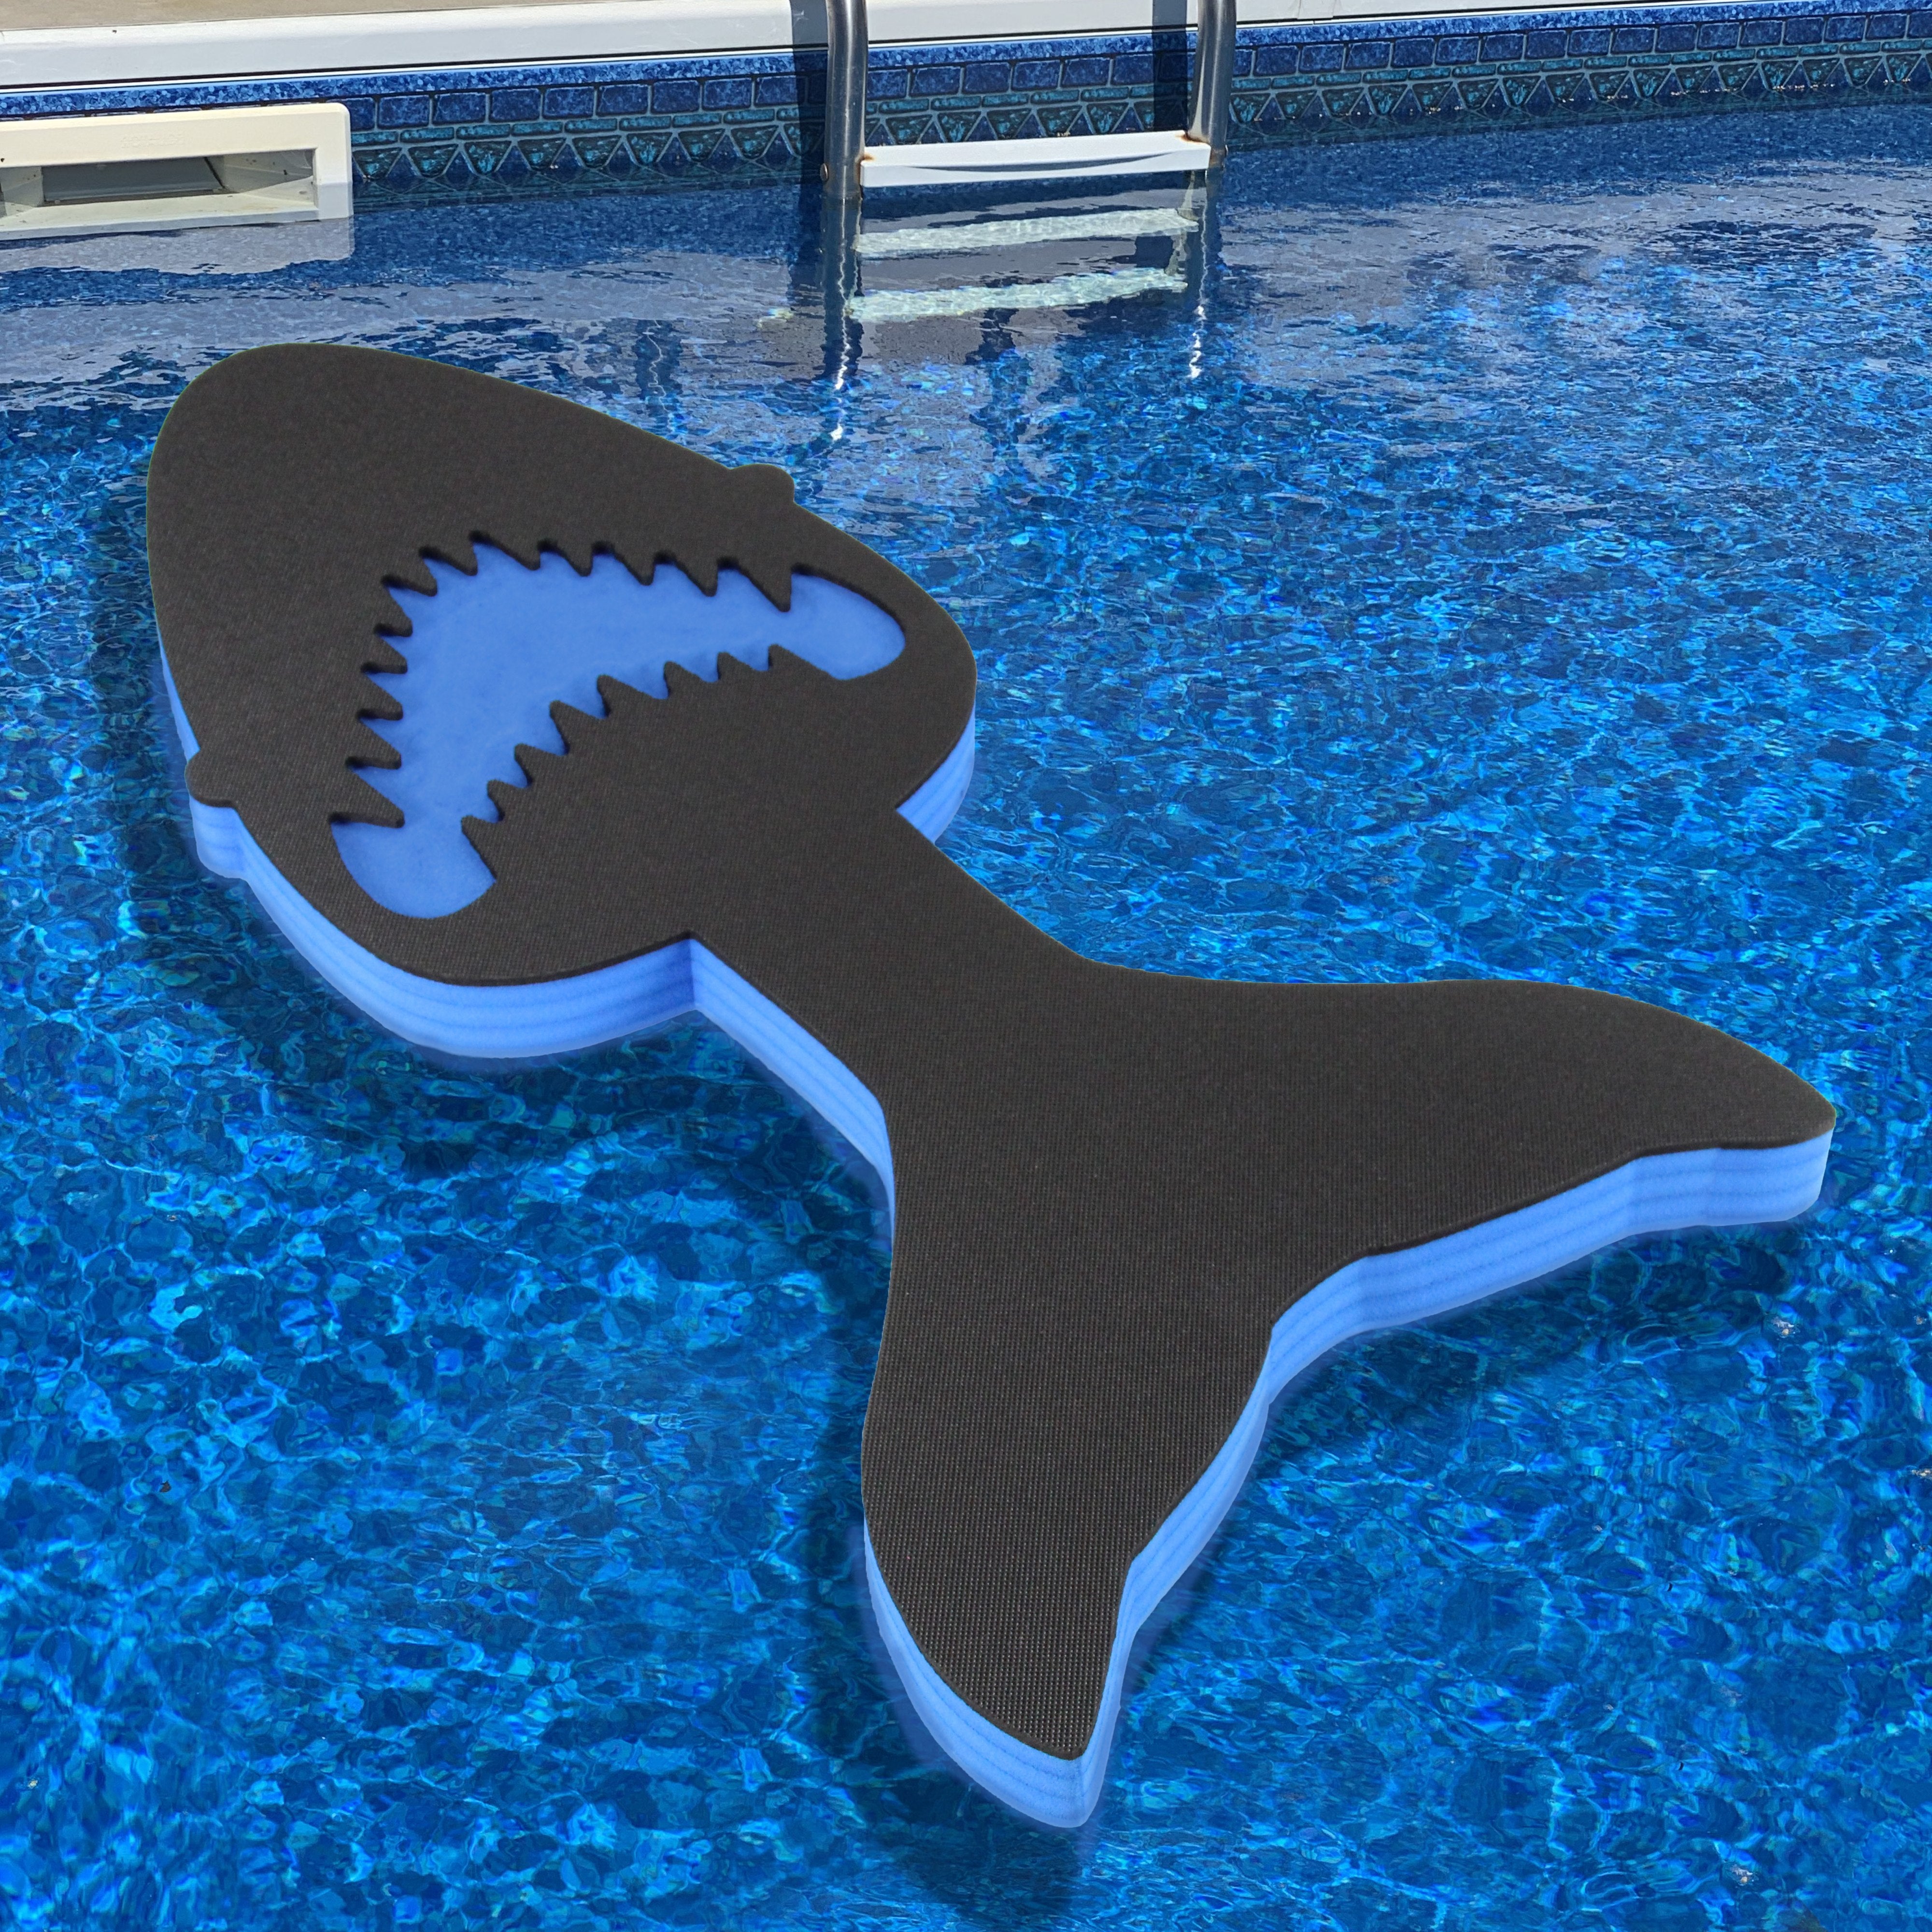 Floating Shark Saddle Seat for Pool Lake or Beach Party Comfortable Water Float Lounge Chair Buoyant Durable Heavy Duty Foam 34.5 Inches Long